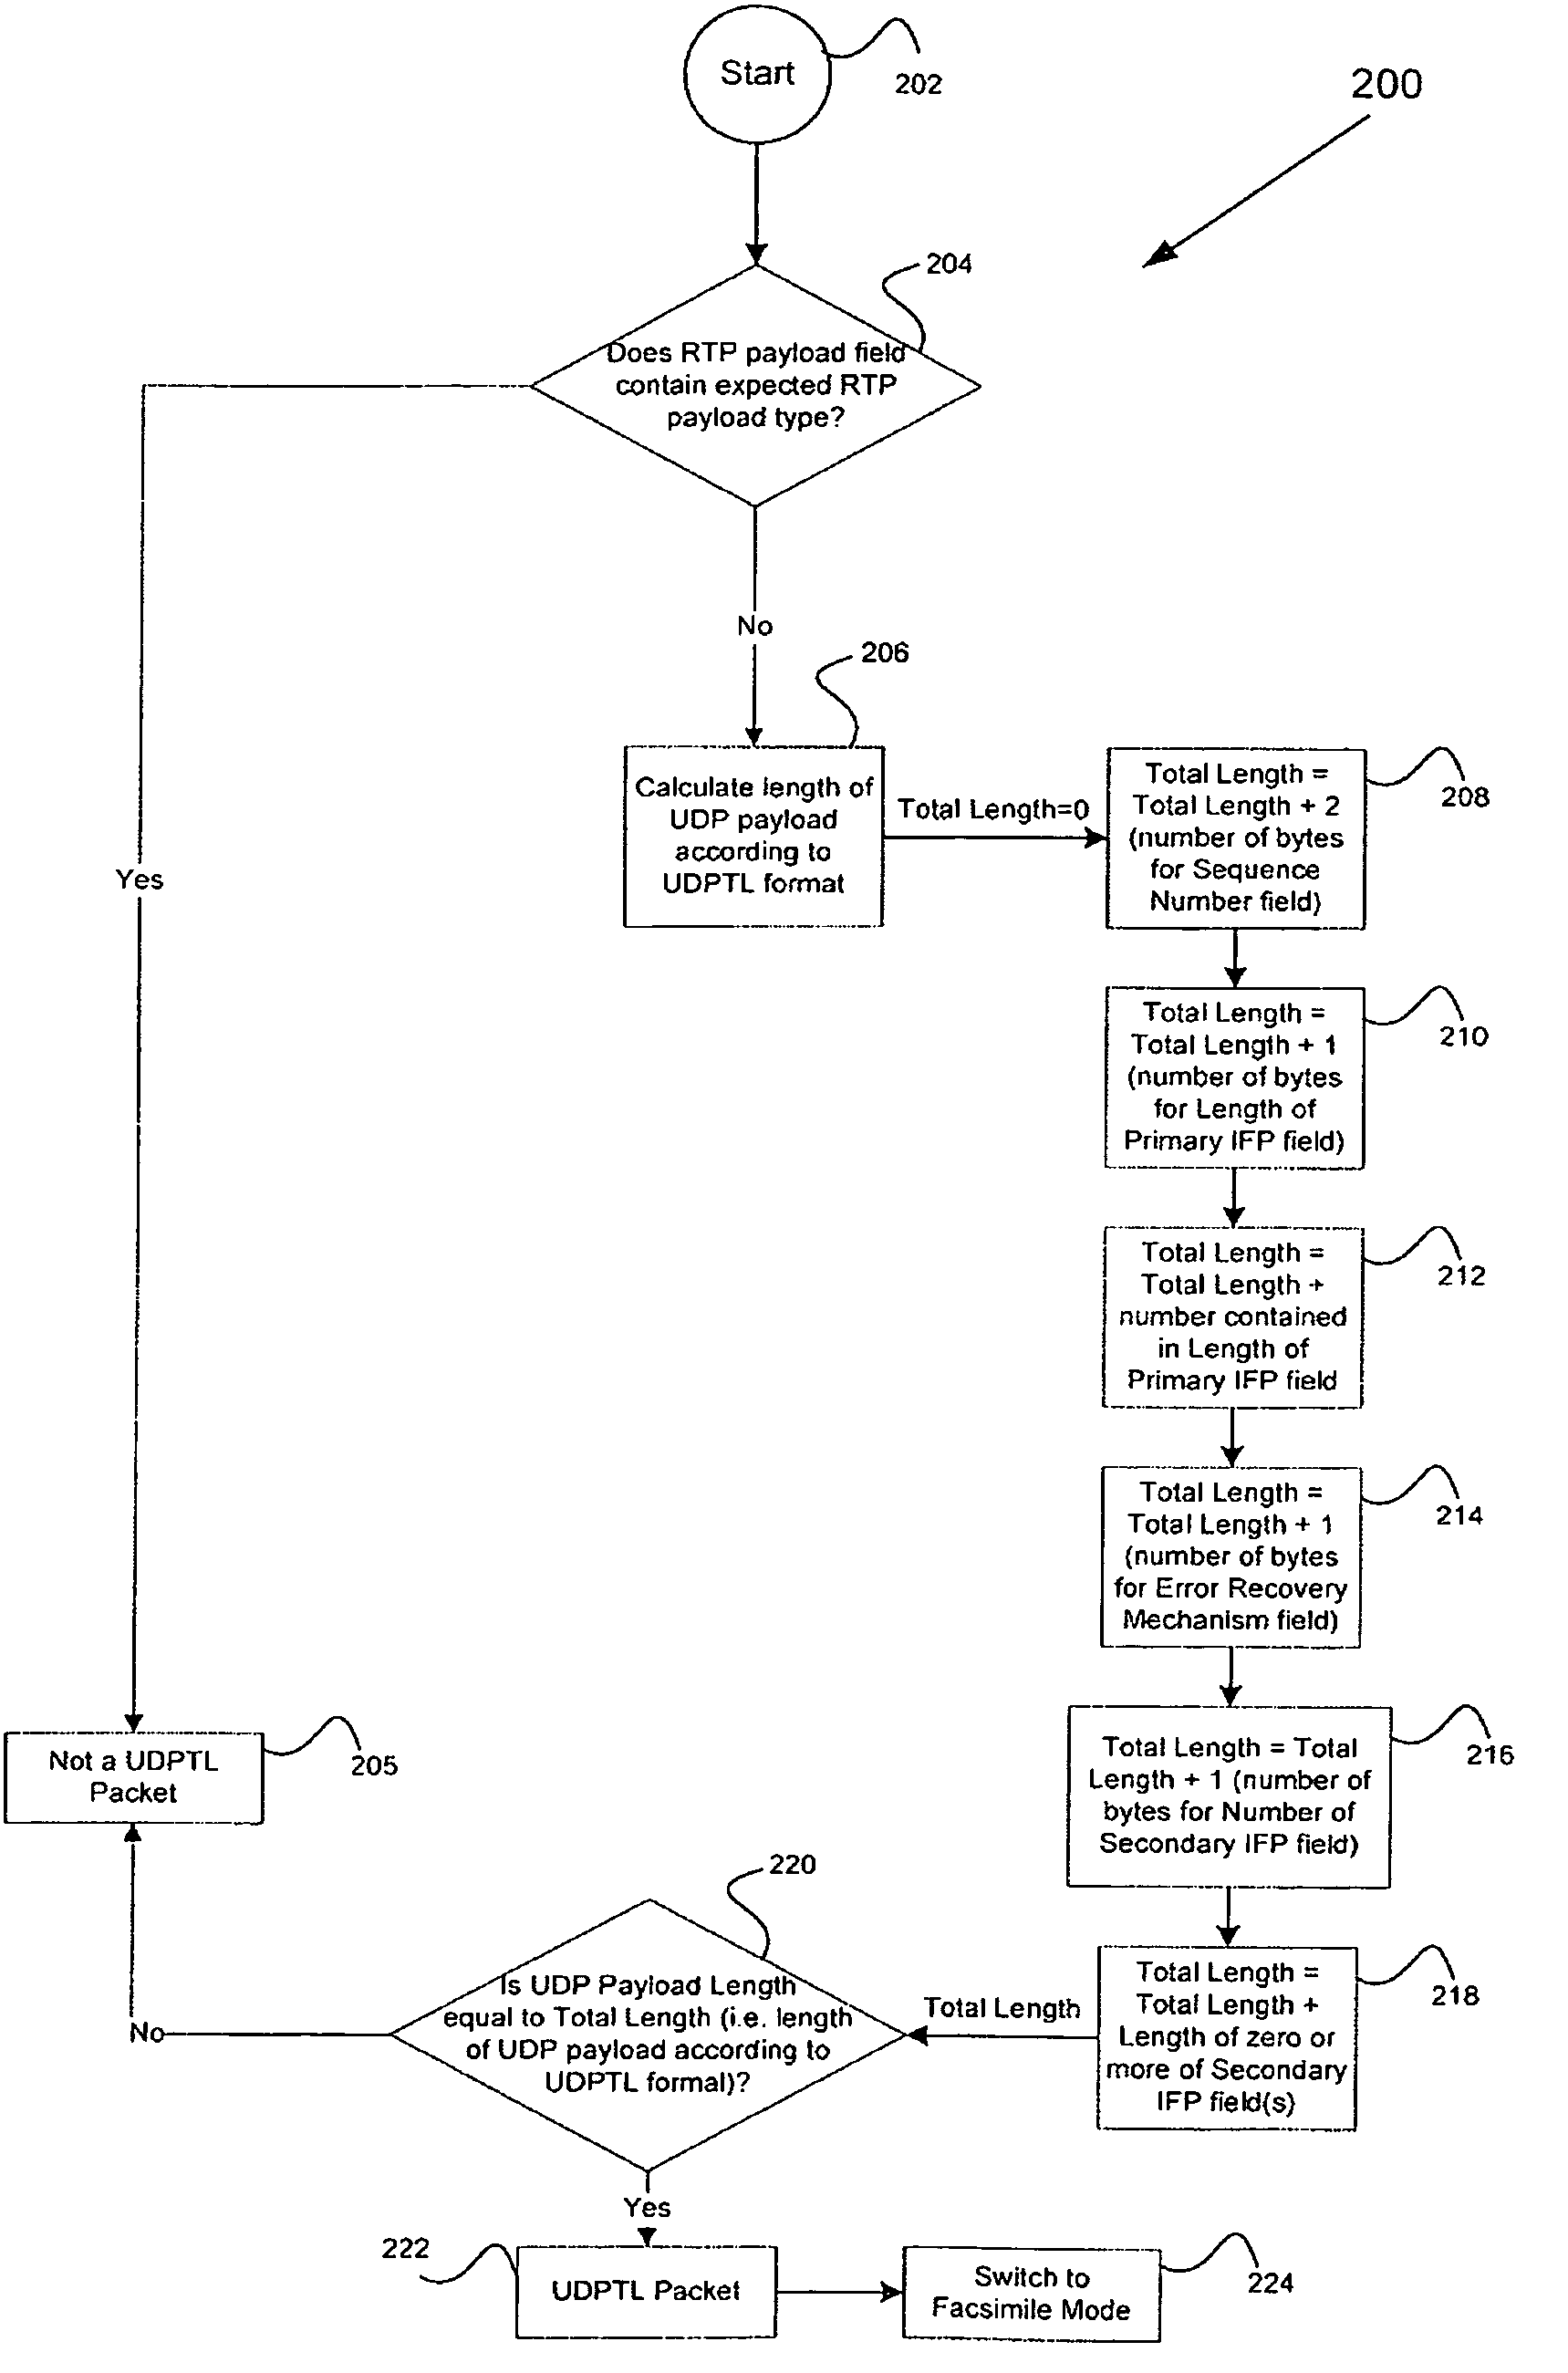 Method and system for detecting facsimile communication during a VoIP session